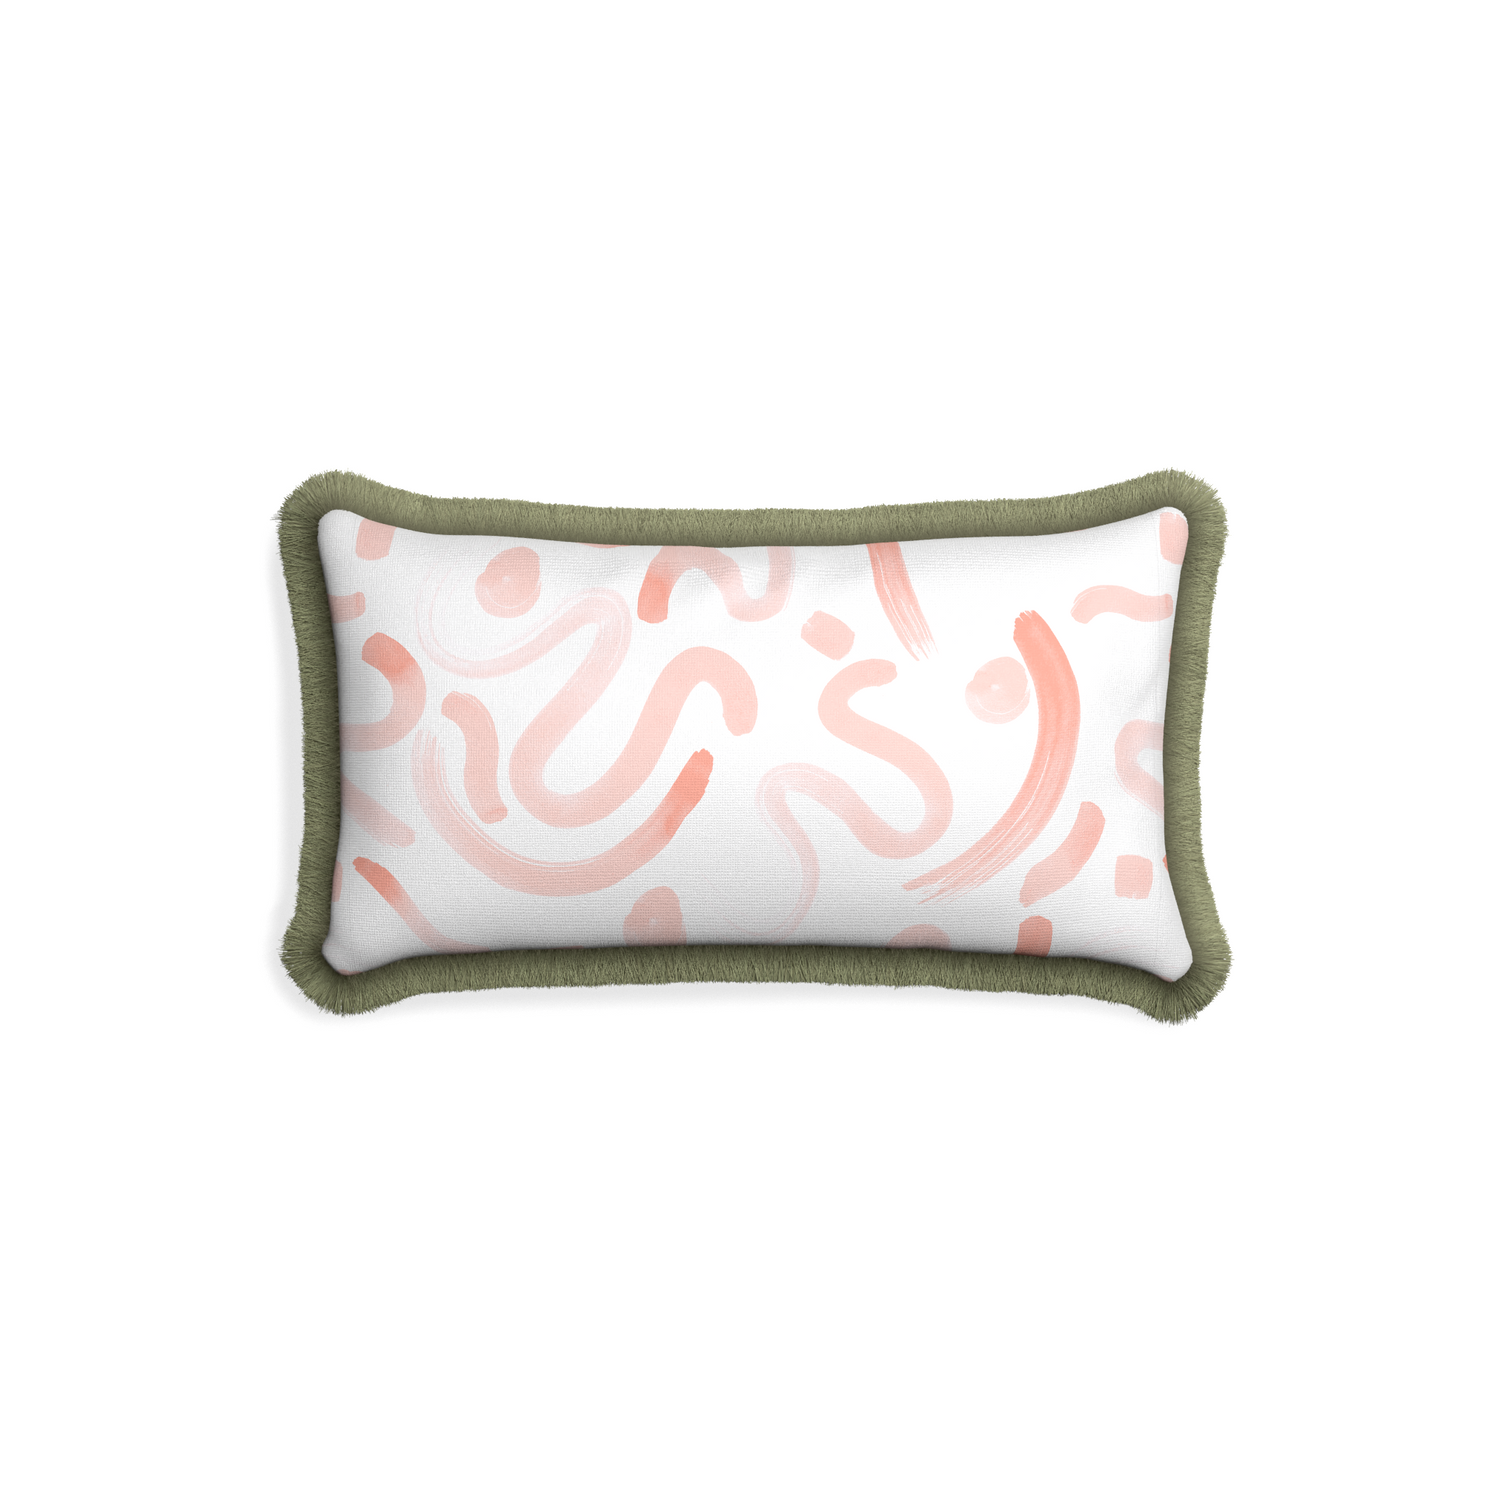 Petite-lumbar hockney pink custom pink graphicpillow with sage fringe on white background